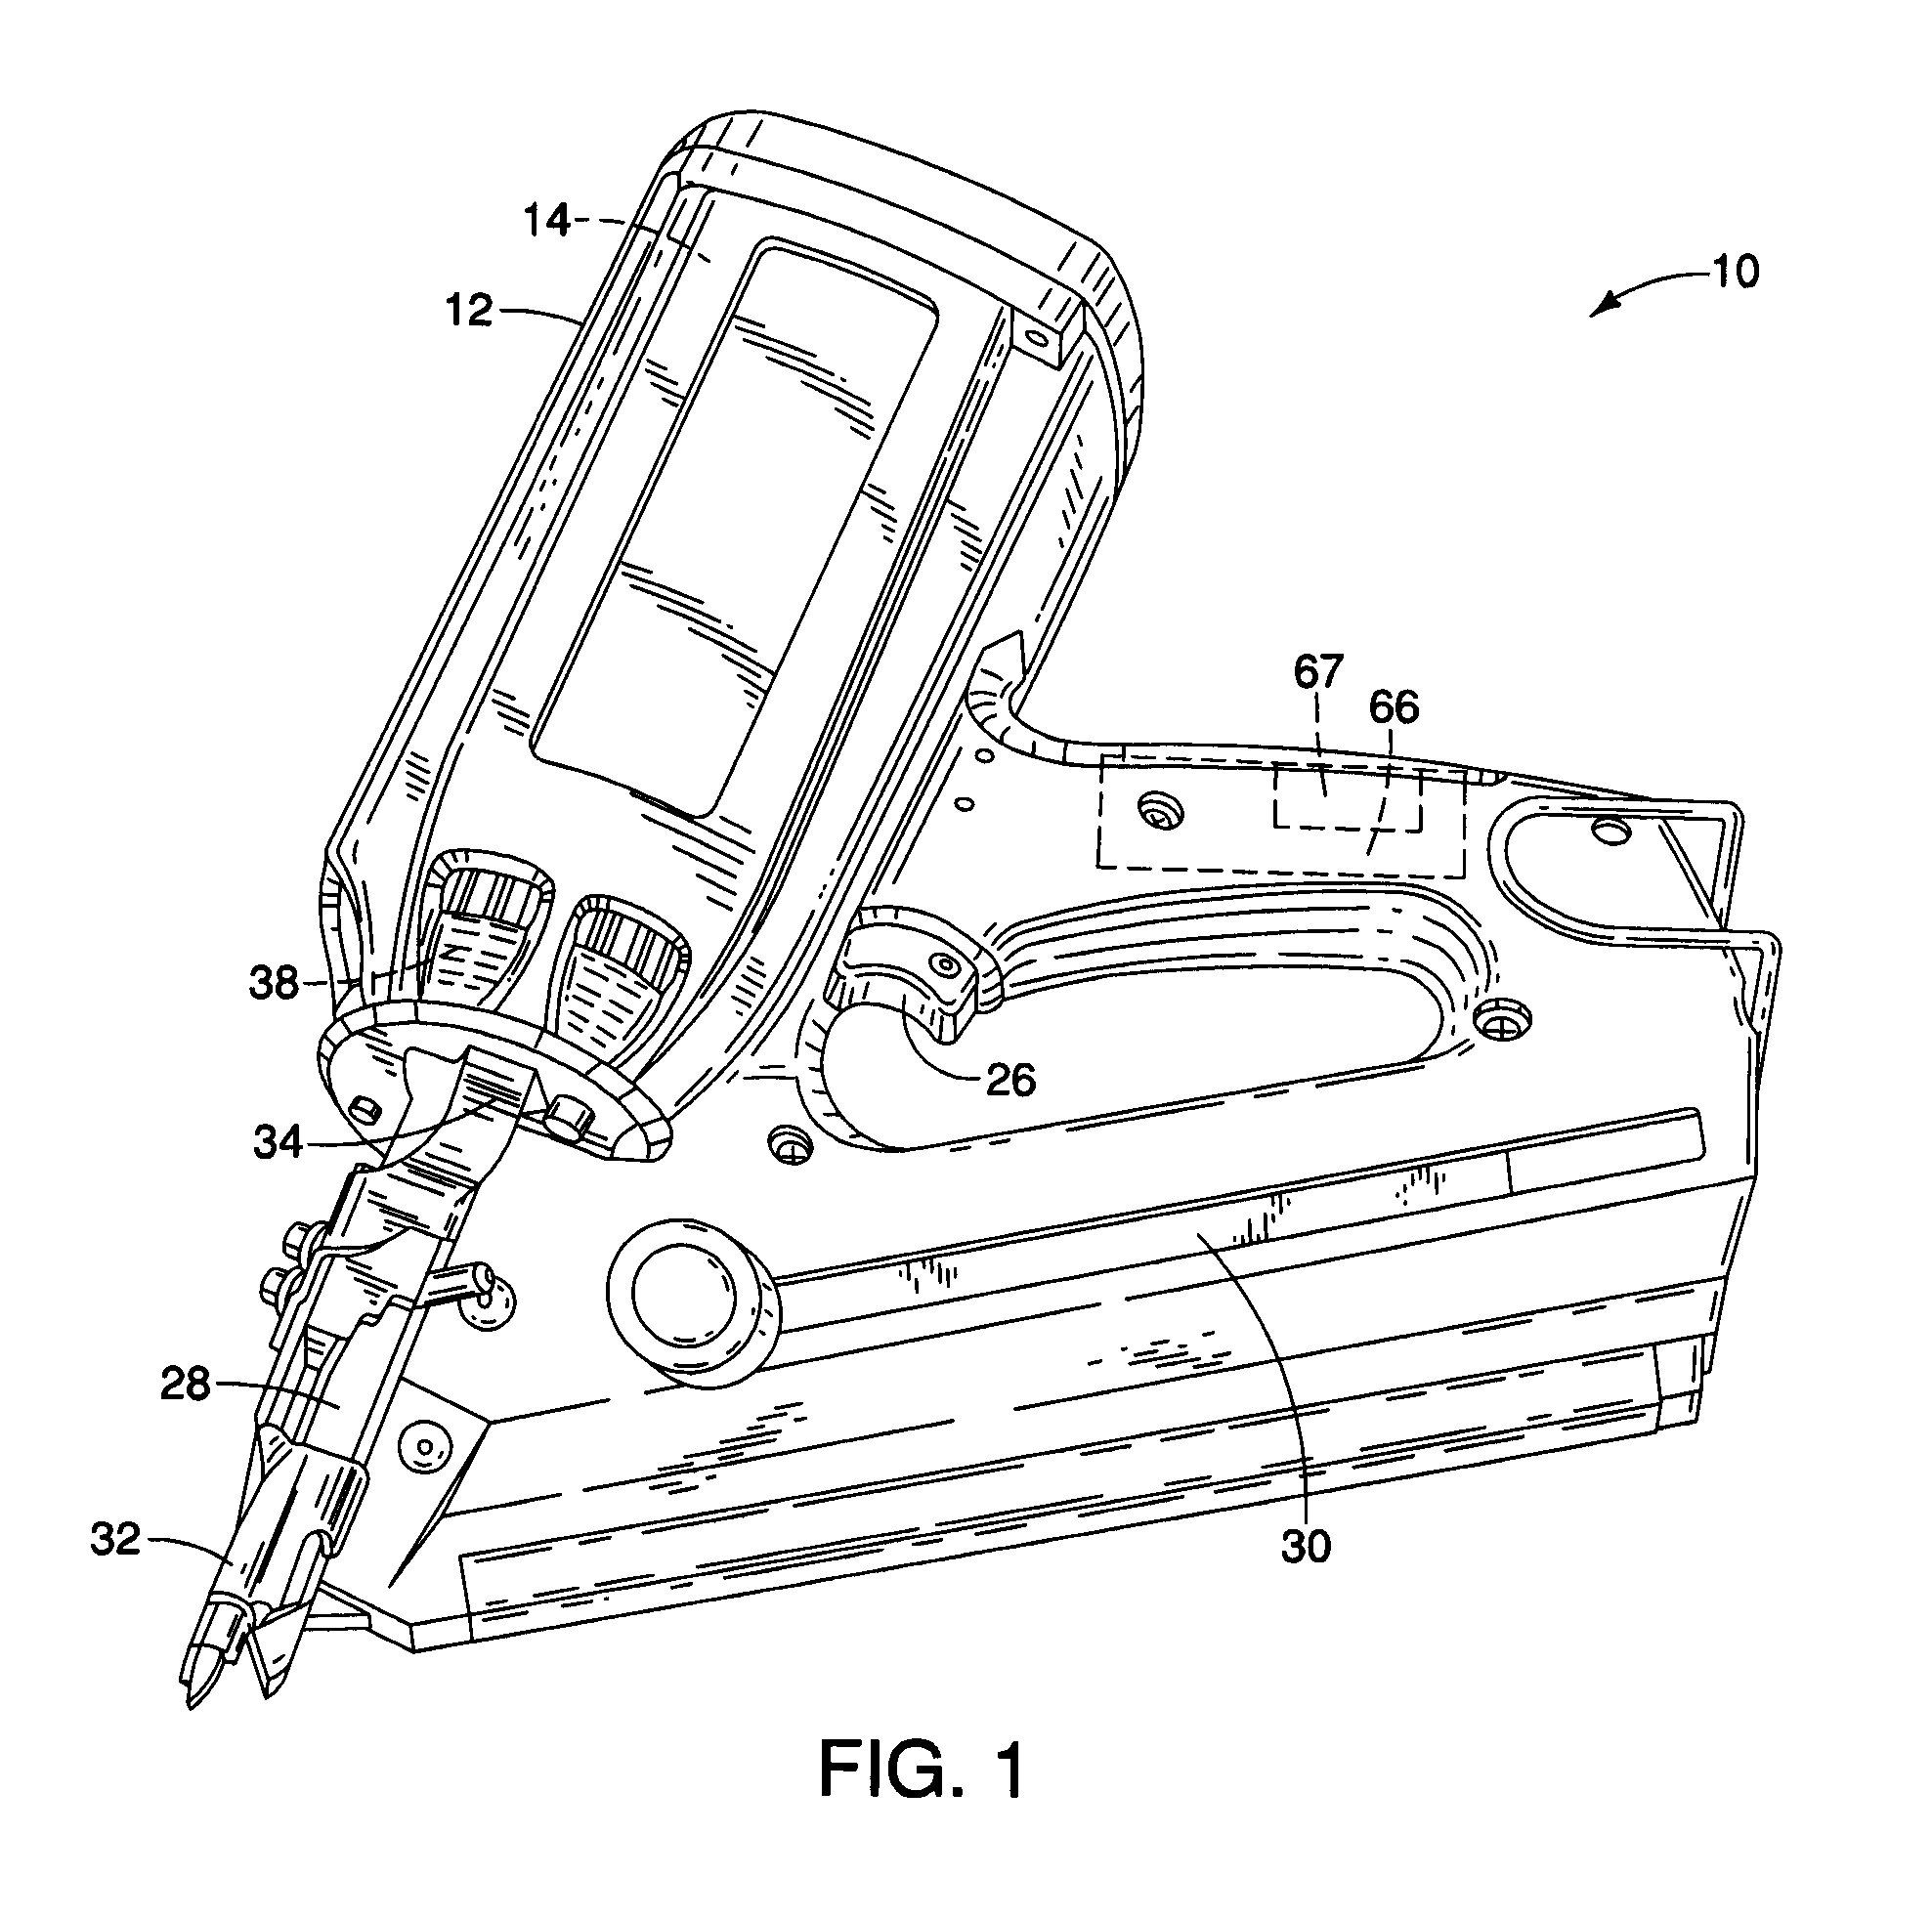 Fuel level monitoring system for combustion-powered tools